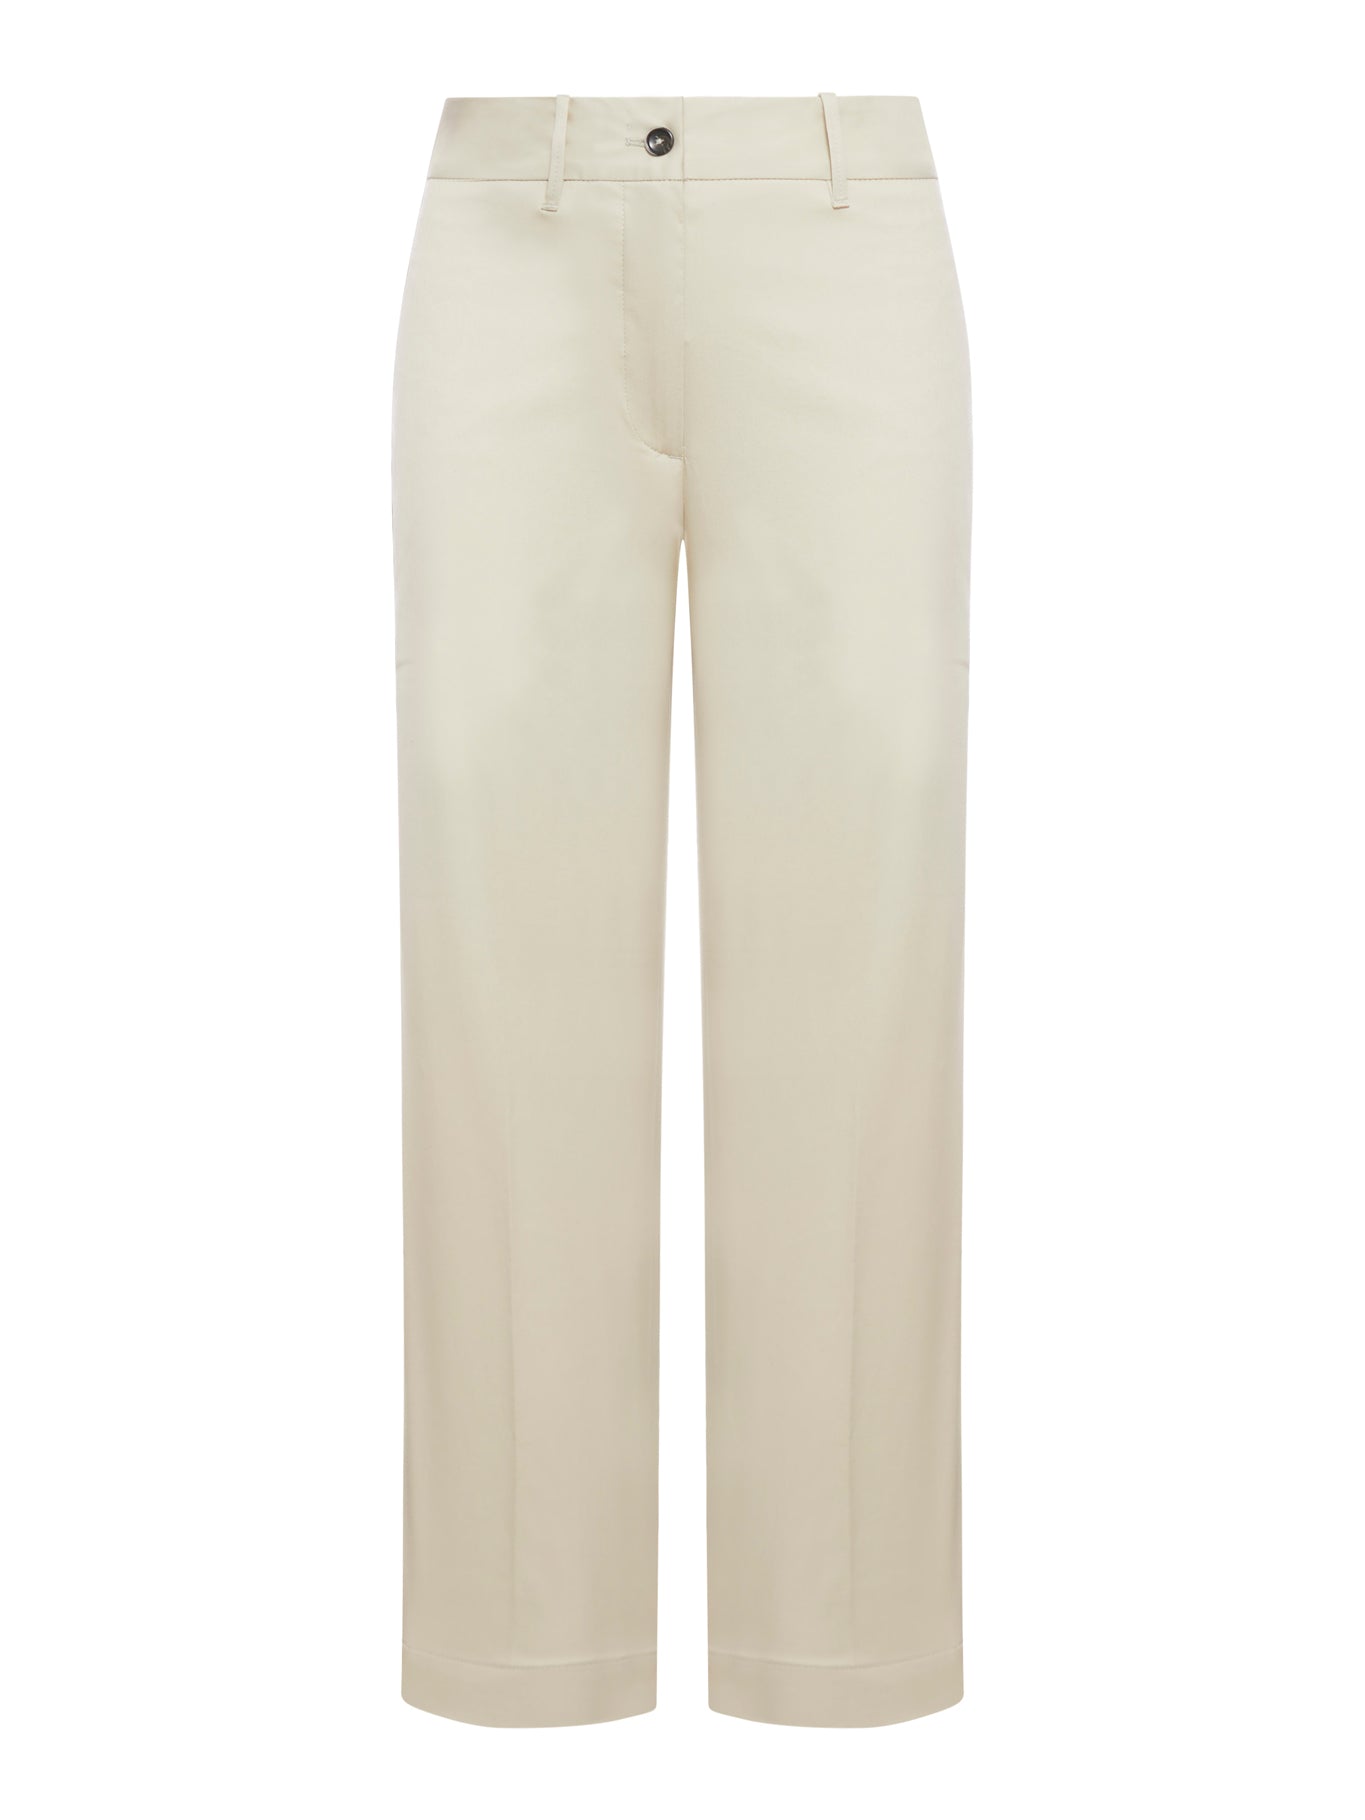 TROUSERS IN COTTON